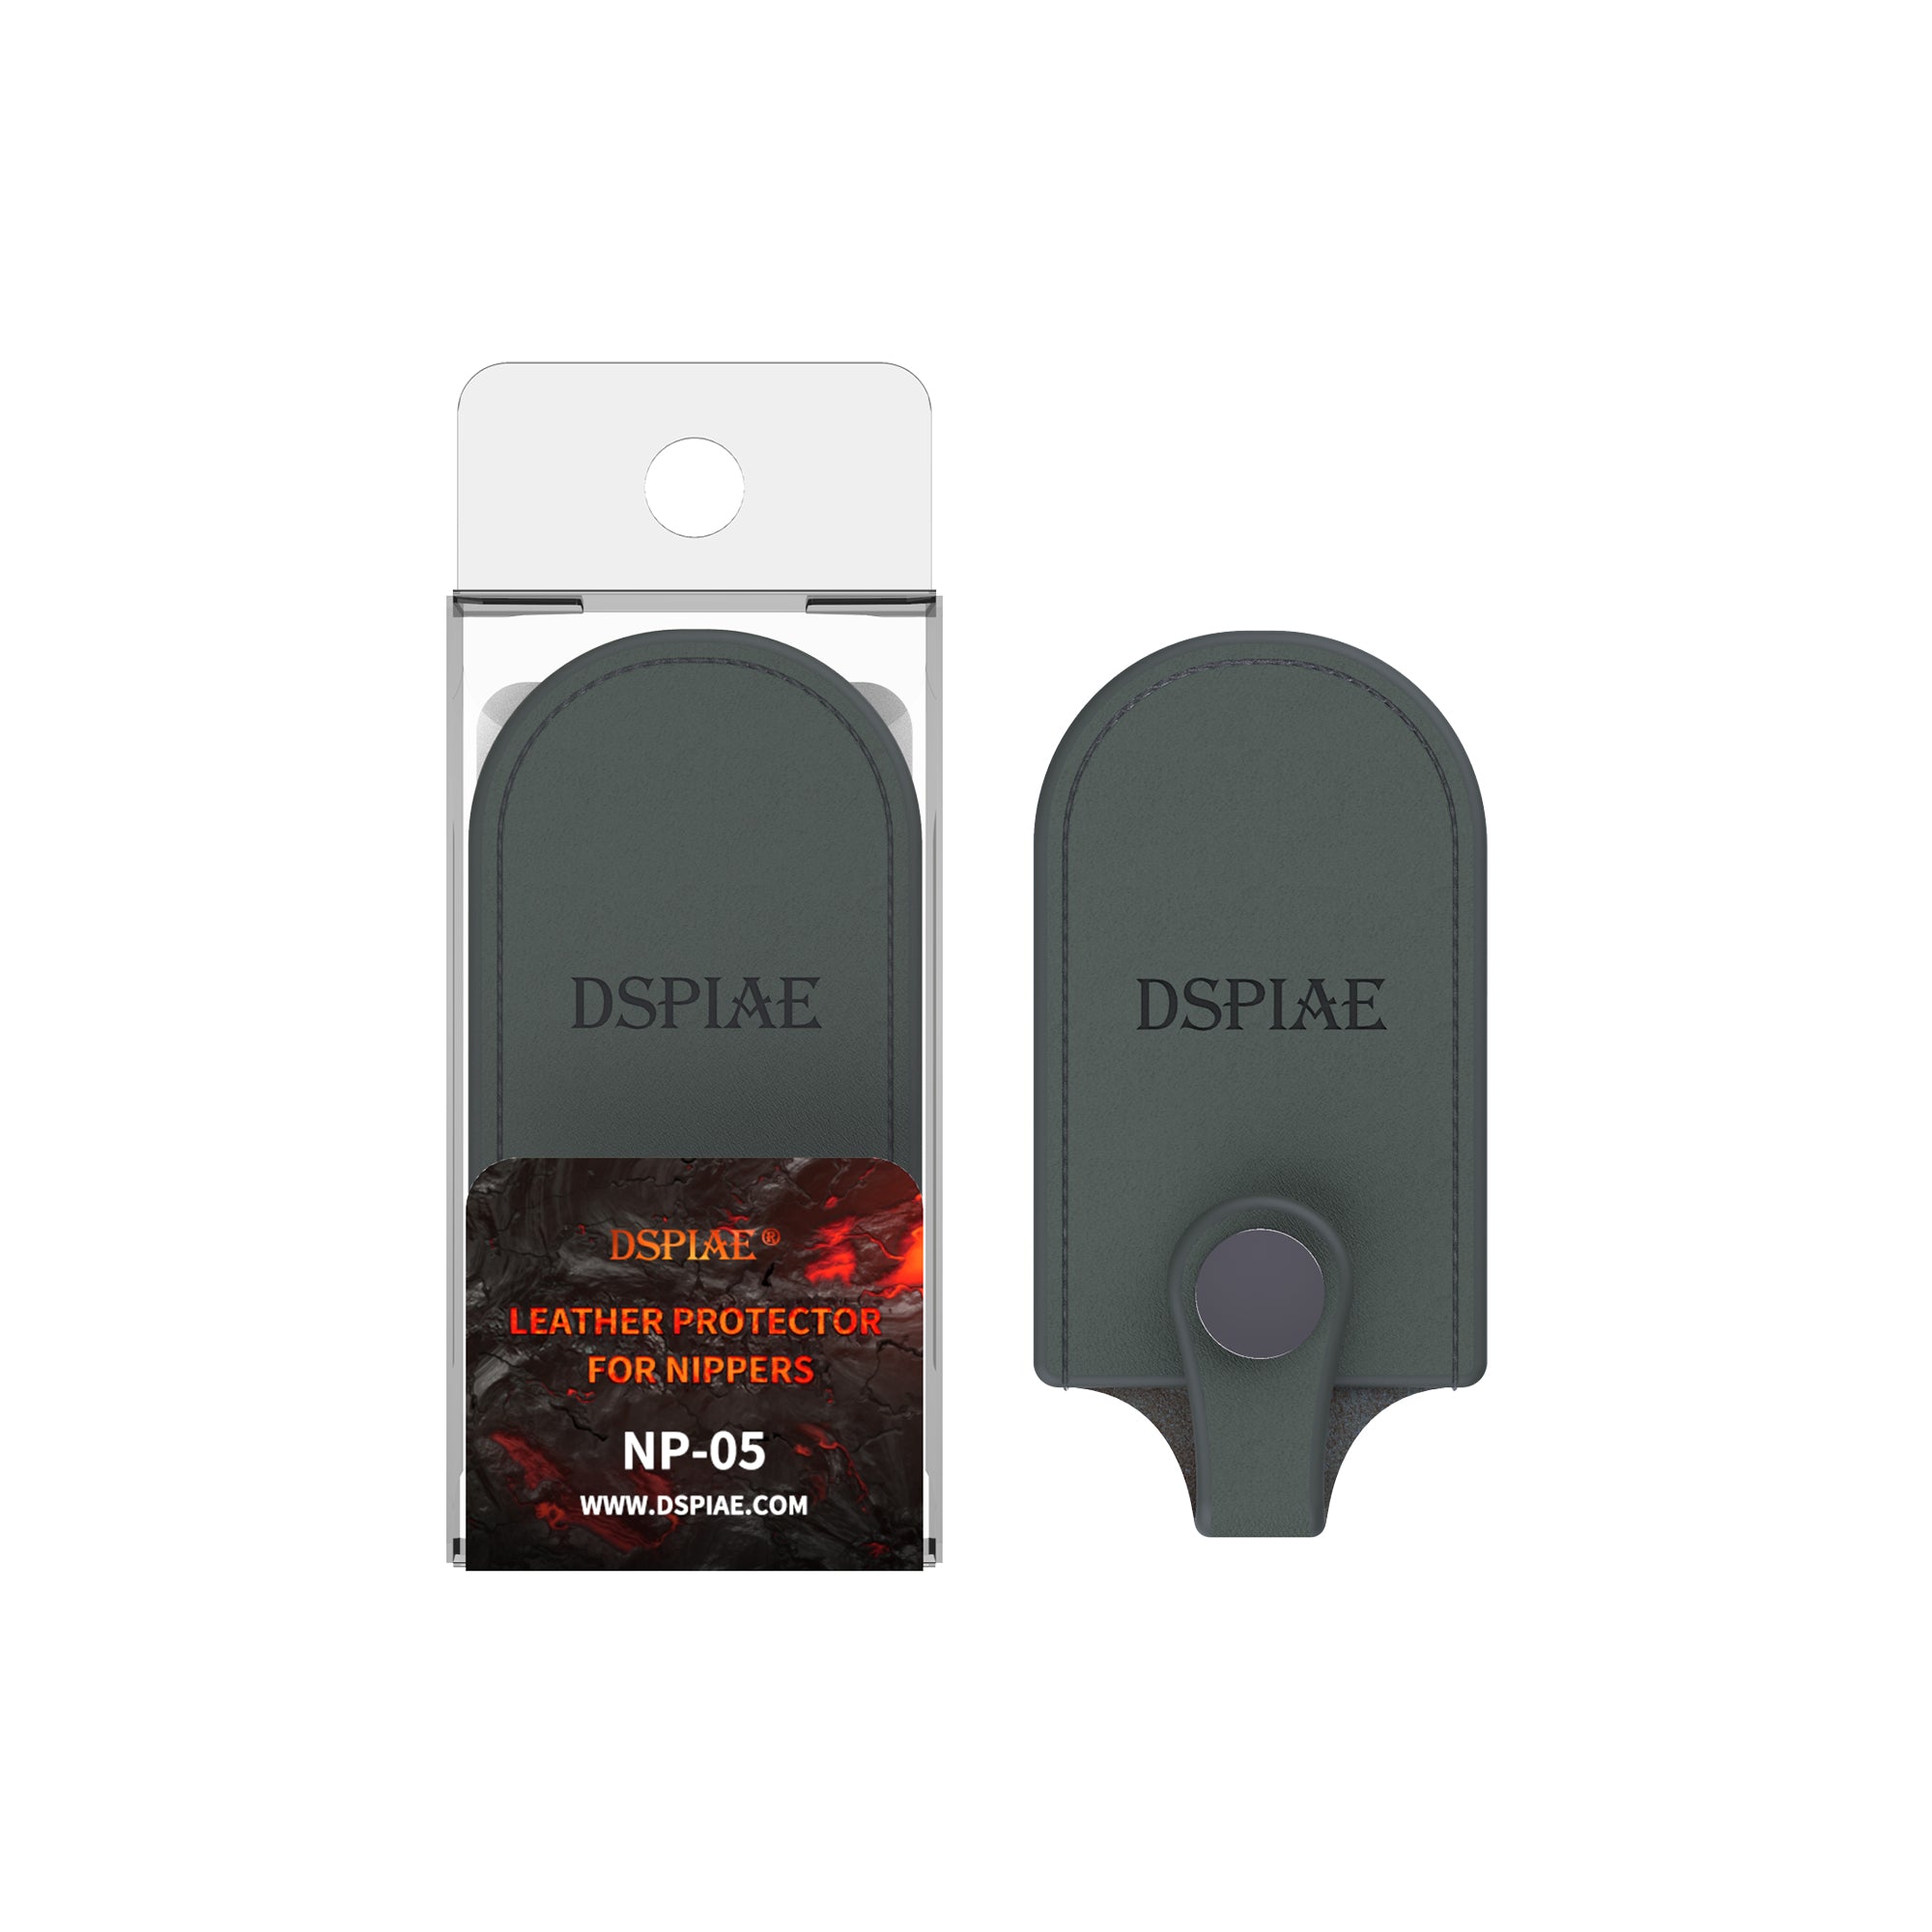 DSPIAE - Leather Protector For Nippers